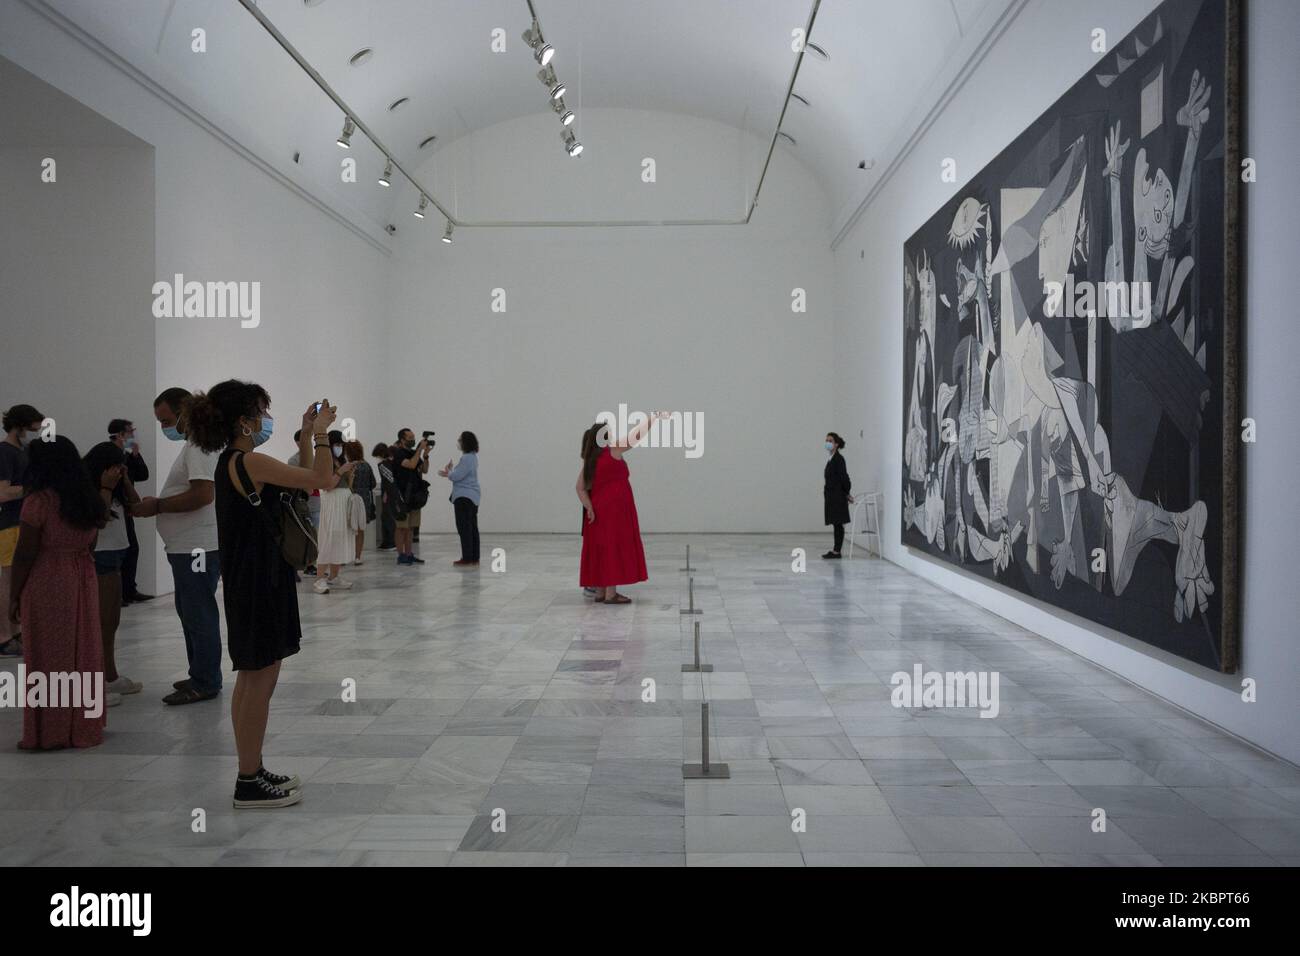 (EDITORIAL NEWS USE ONLY - STRICTLY NO COMMERCIAL OR MERCHANDISING USAGE) People look at Guernica by Pablo Picasso during the partial reopening of the Reina Sofia Museum, after its closure in March due to the Covid-19 pandemic, on June 06, 2020 in Madrid, Spain. A maximum of 30 people (30%) at a time are now allowed to view Picasso's iconic anti-war painting depicting the 1937 bombing of the Basque town of Guernica during the Spanish civil war. (Photo by Oscar Gonzalez/NurPhoto) Stock Photo